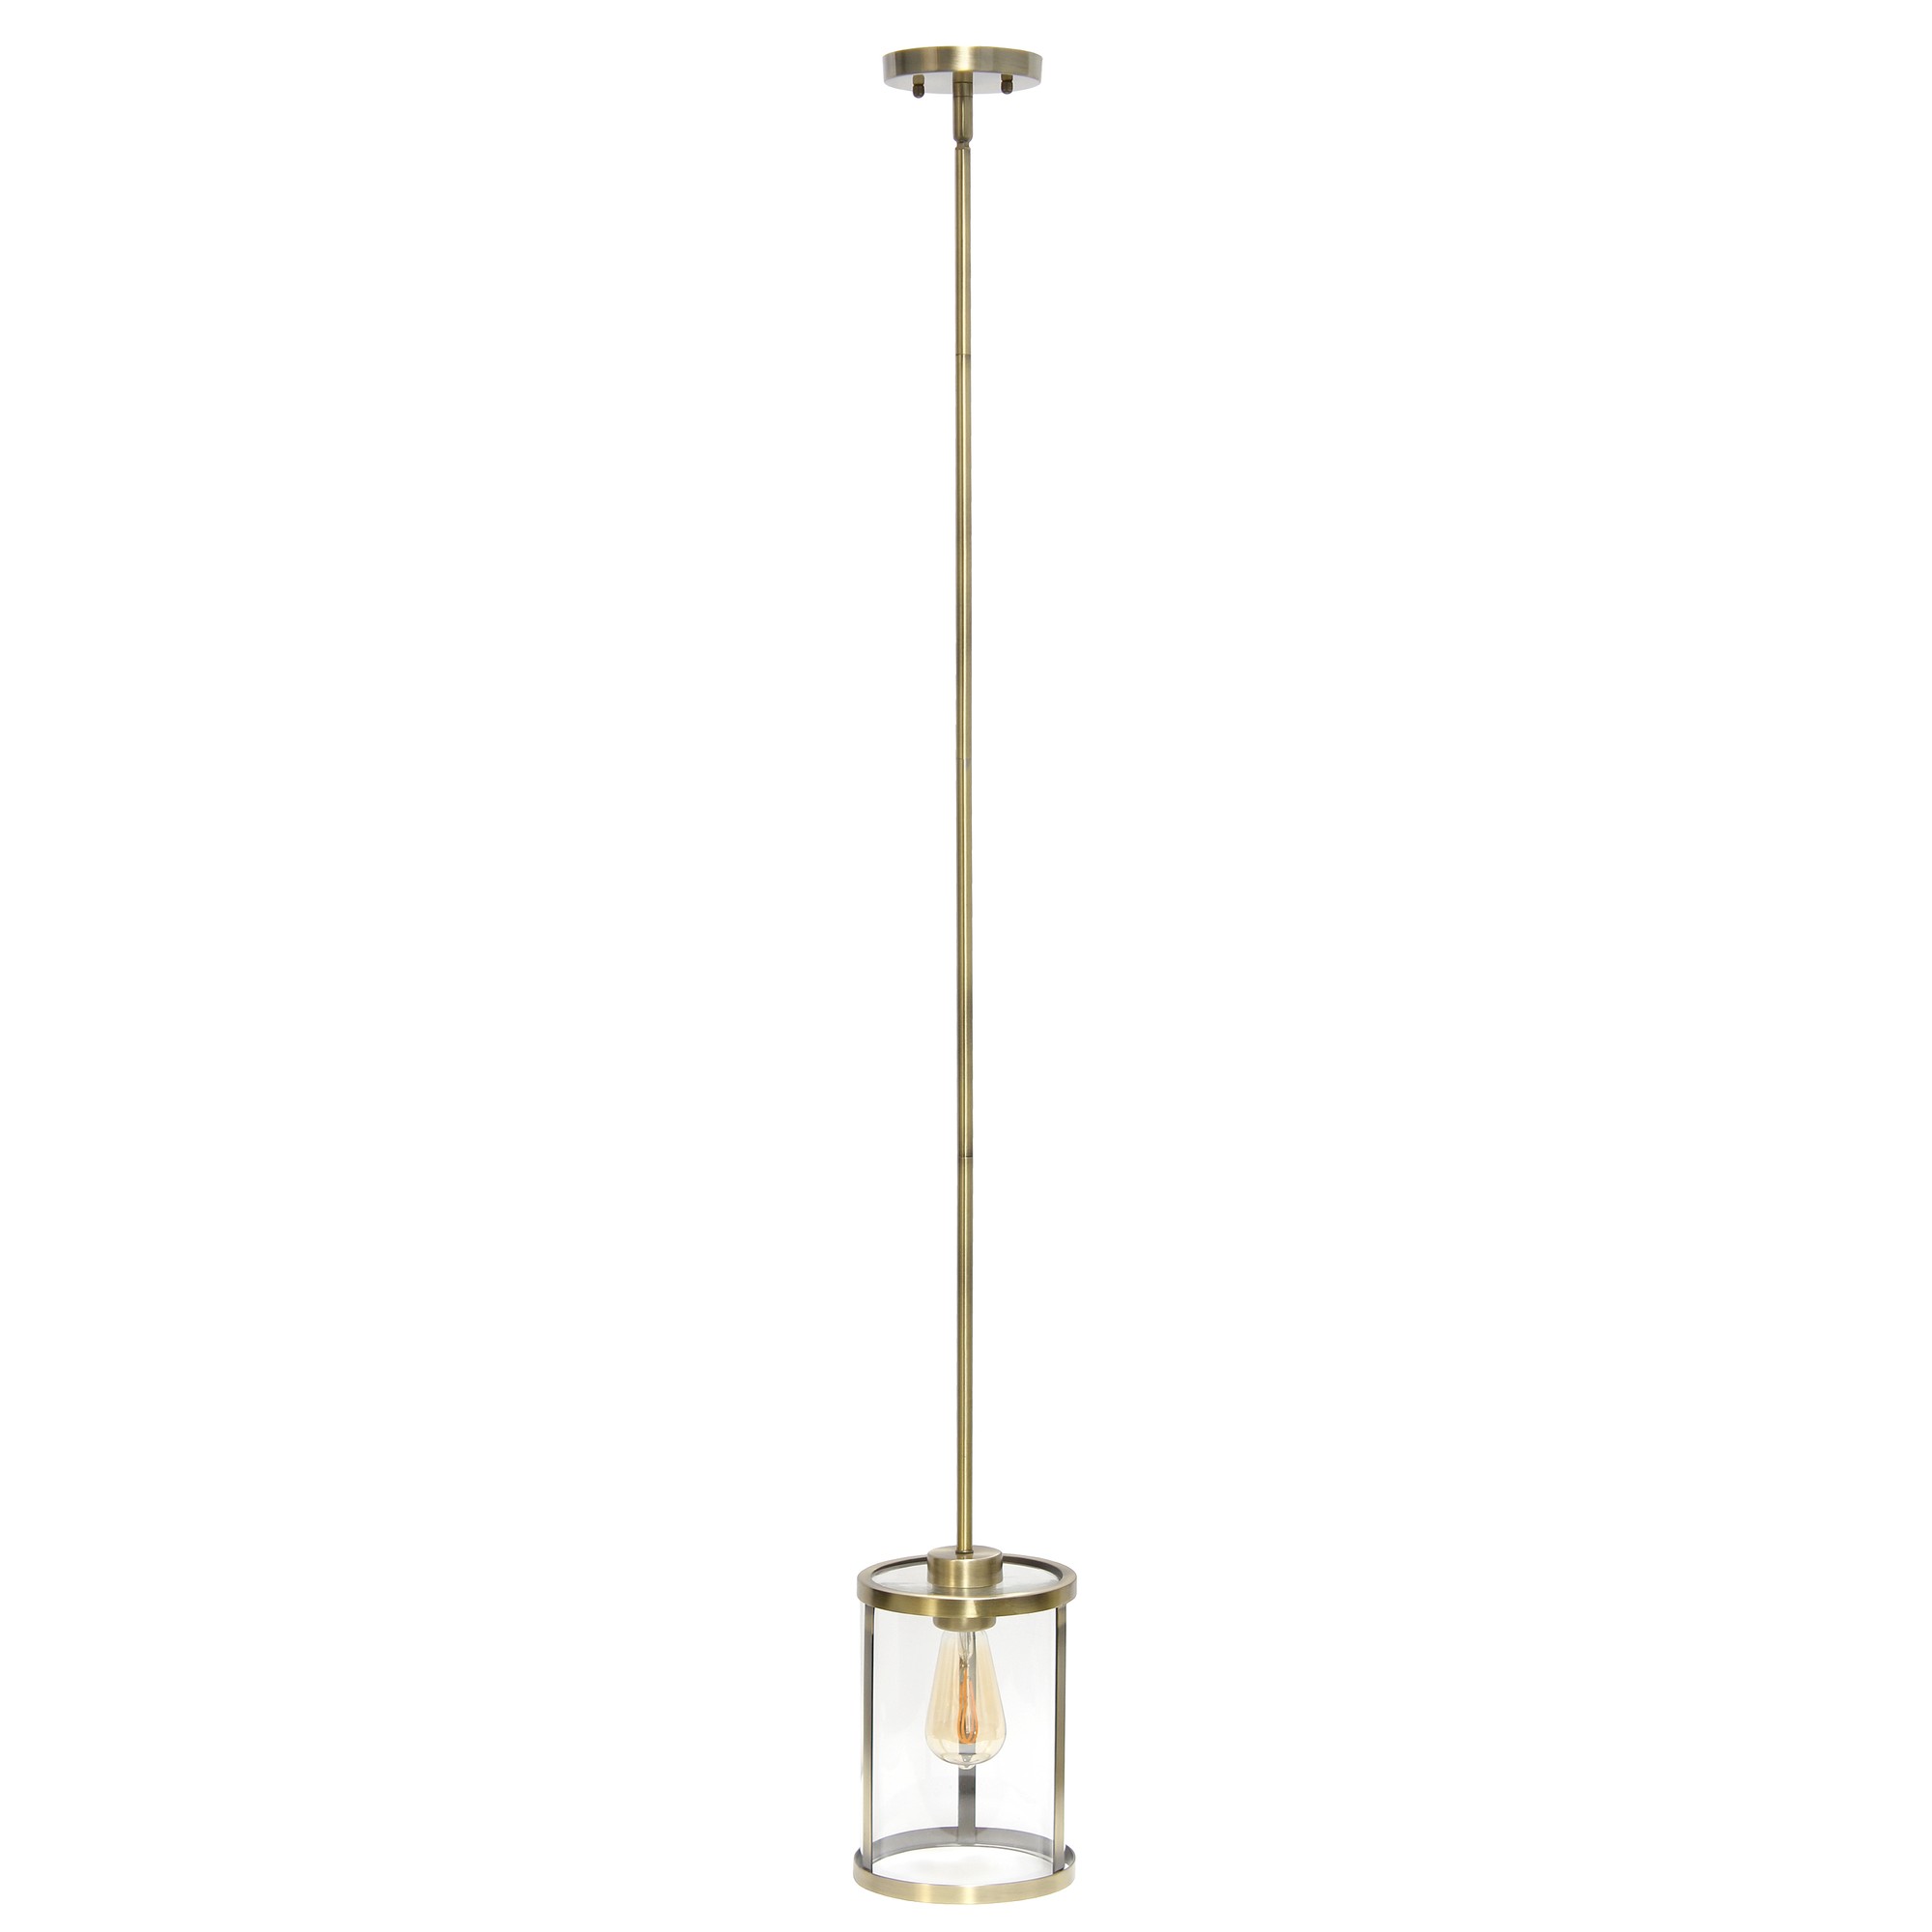 Lalia Home 1-Light 9.25" Modern Adjustable Hanging Cylindrical Clear Glass Pendant Fixture with Metal Accents, Antique Brass